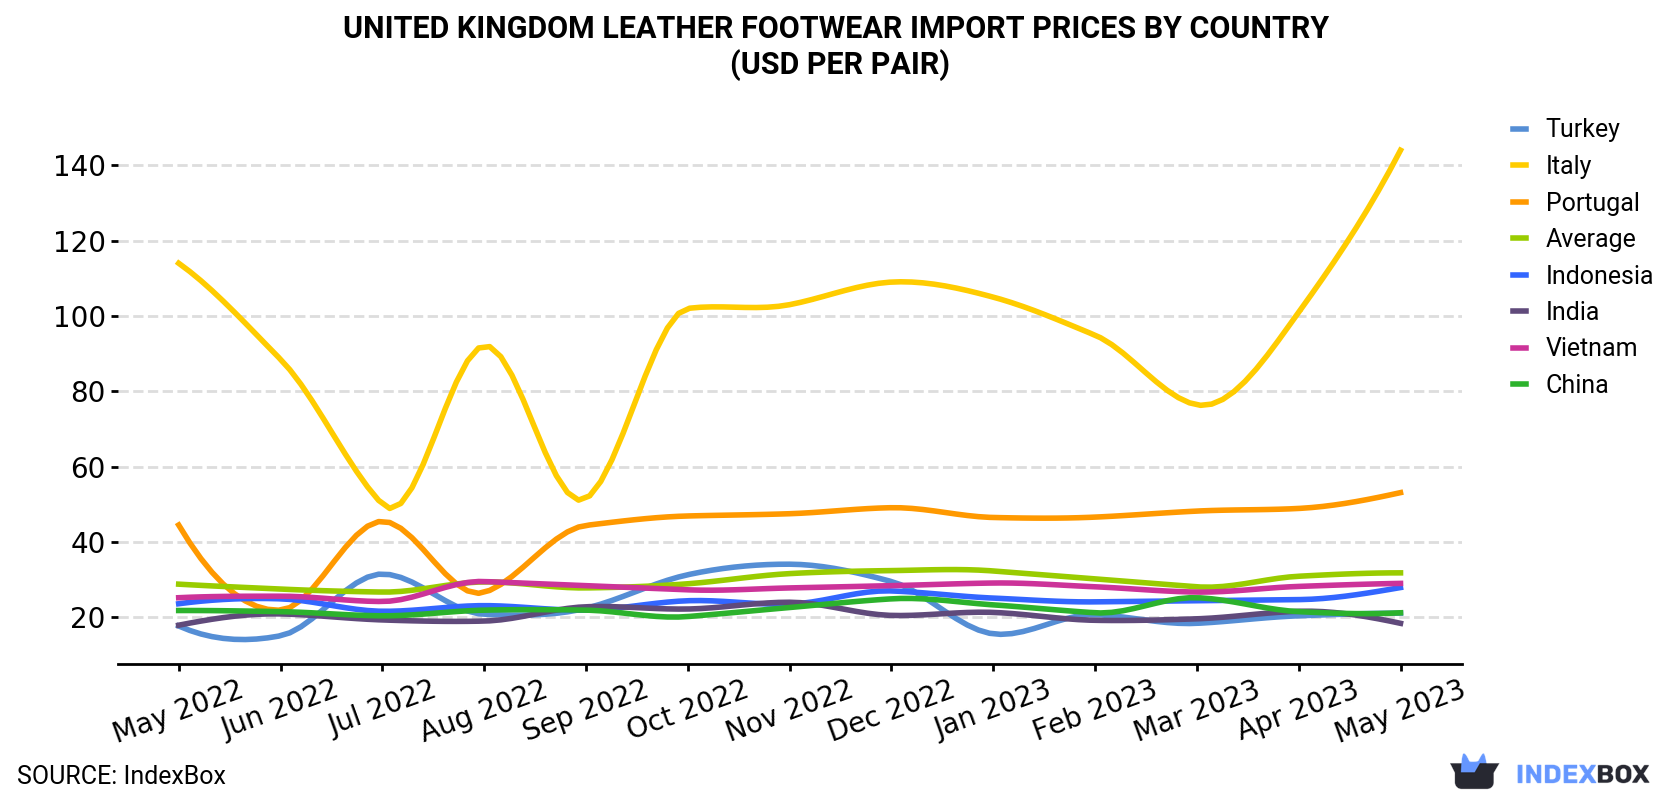 United Kingdom Leather Footwear Import Prices By Country (USD Per Pair)